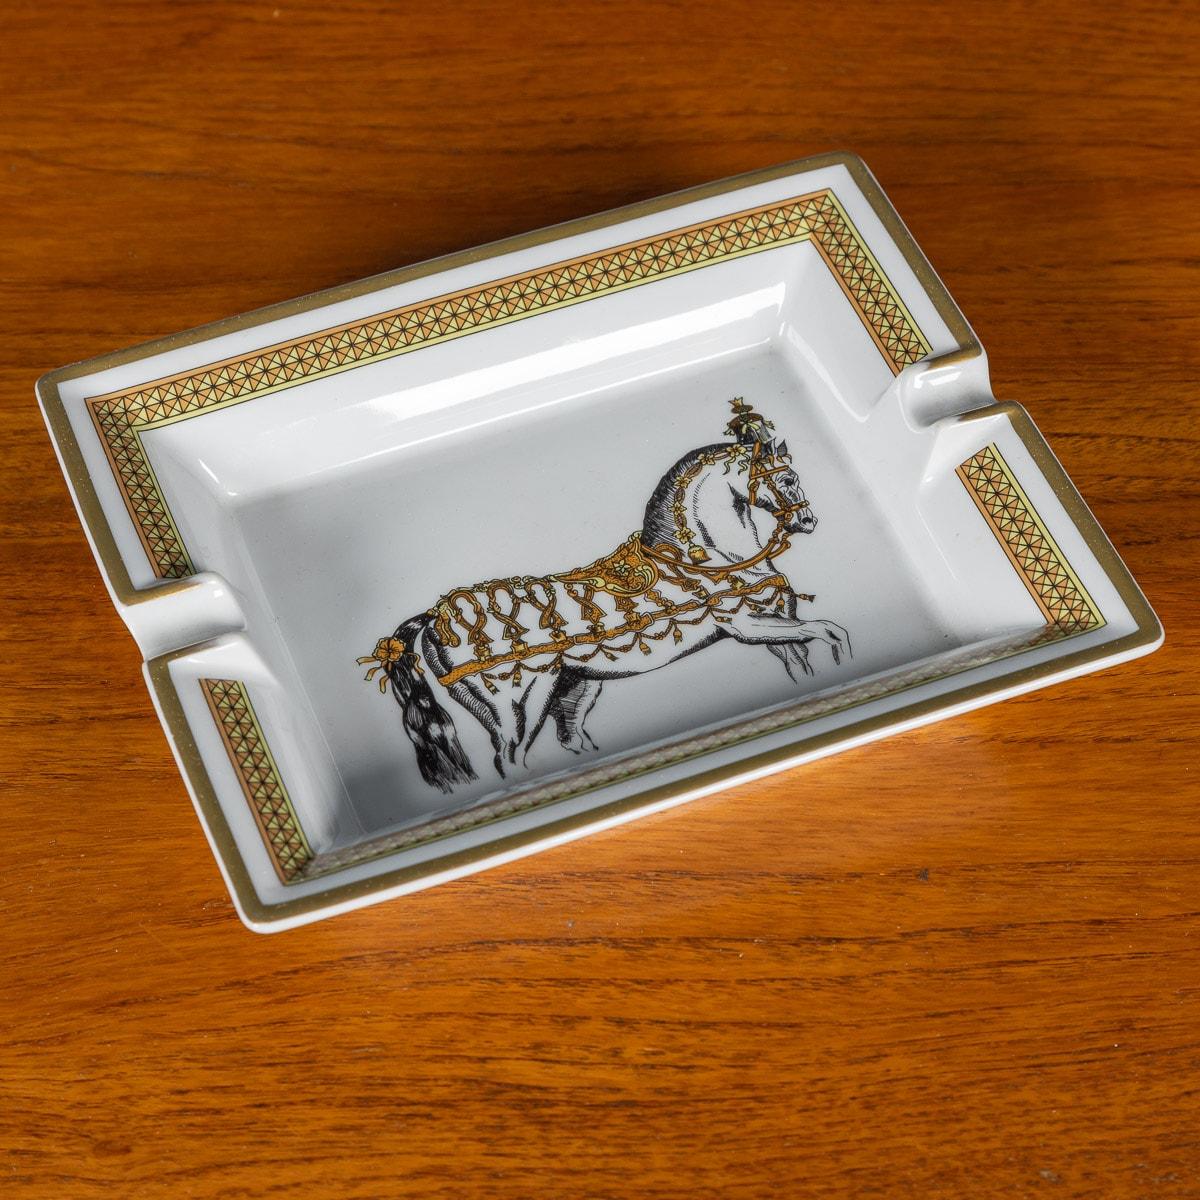 A ceramic ashtray by Hermes, made in France in the latter half of the 20th century. These ashtrays have always been very collectable with the vintage models in particular. This one has a lovely equestrian theme, a lovely decorative addition to any